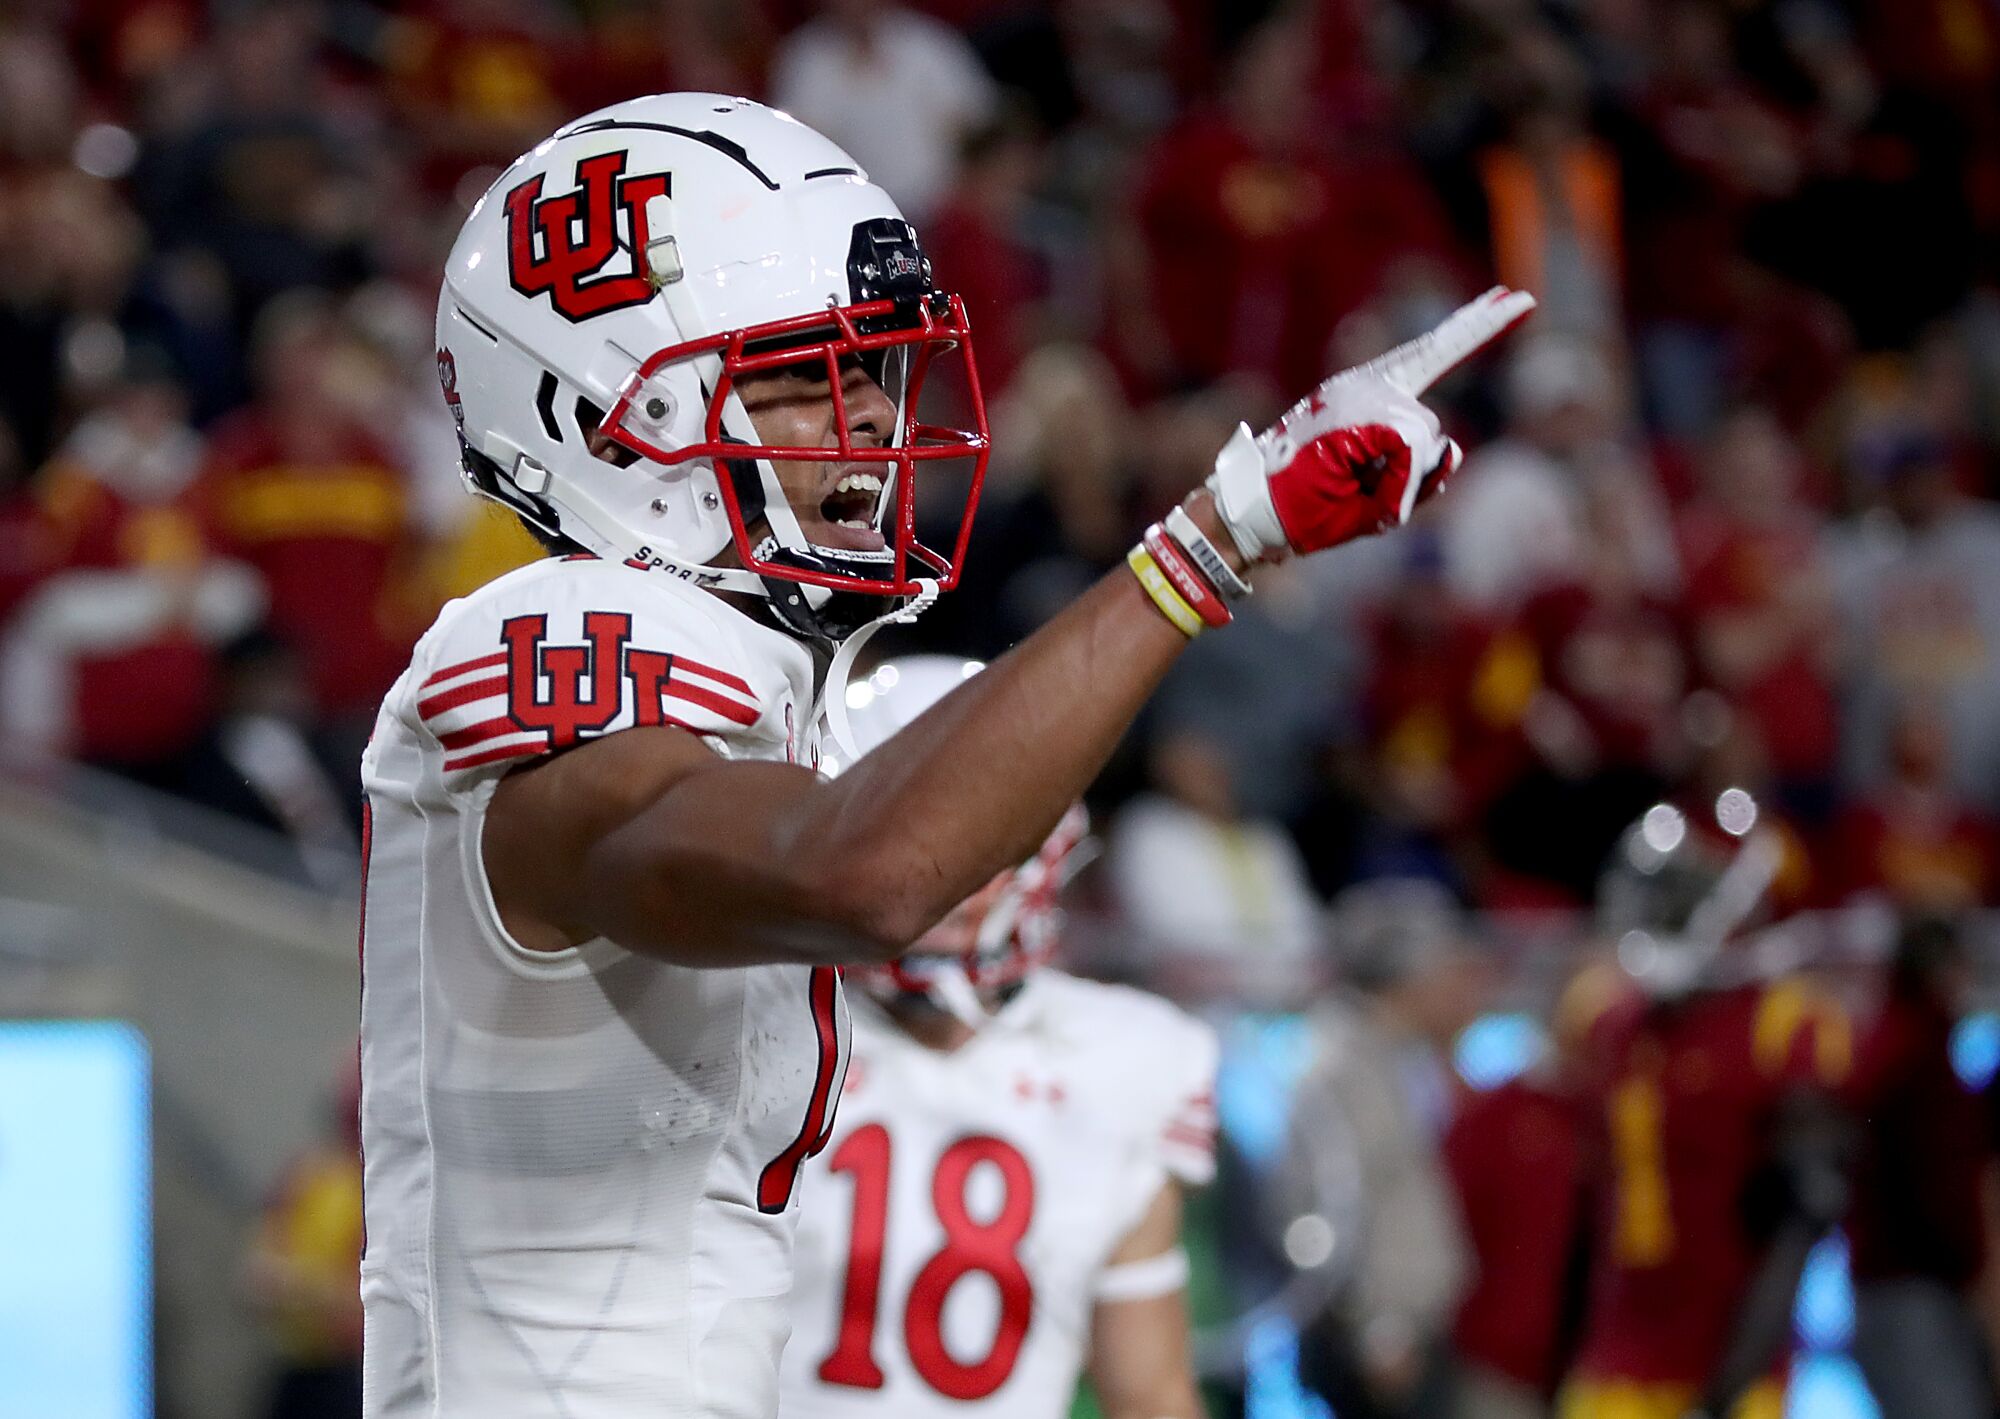 Utah receiver Devaughn Vele reacts after scoring a touchdown against USC in the second half.